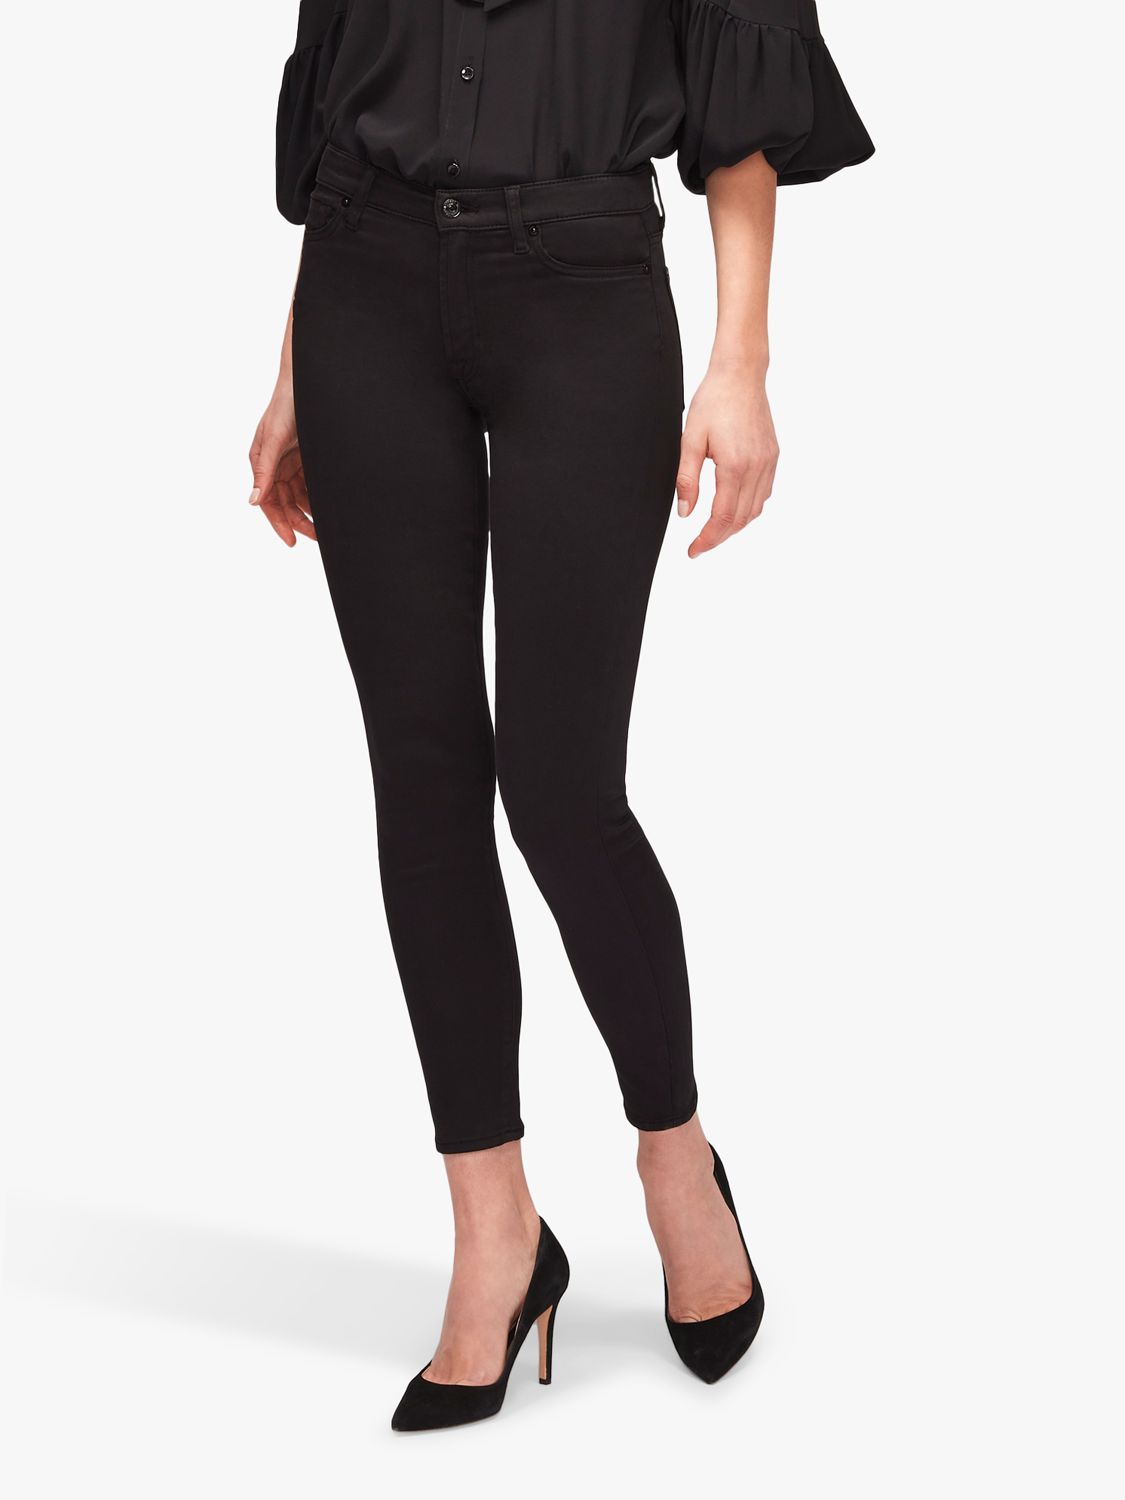 7 for all mankind sateen skinny